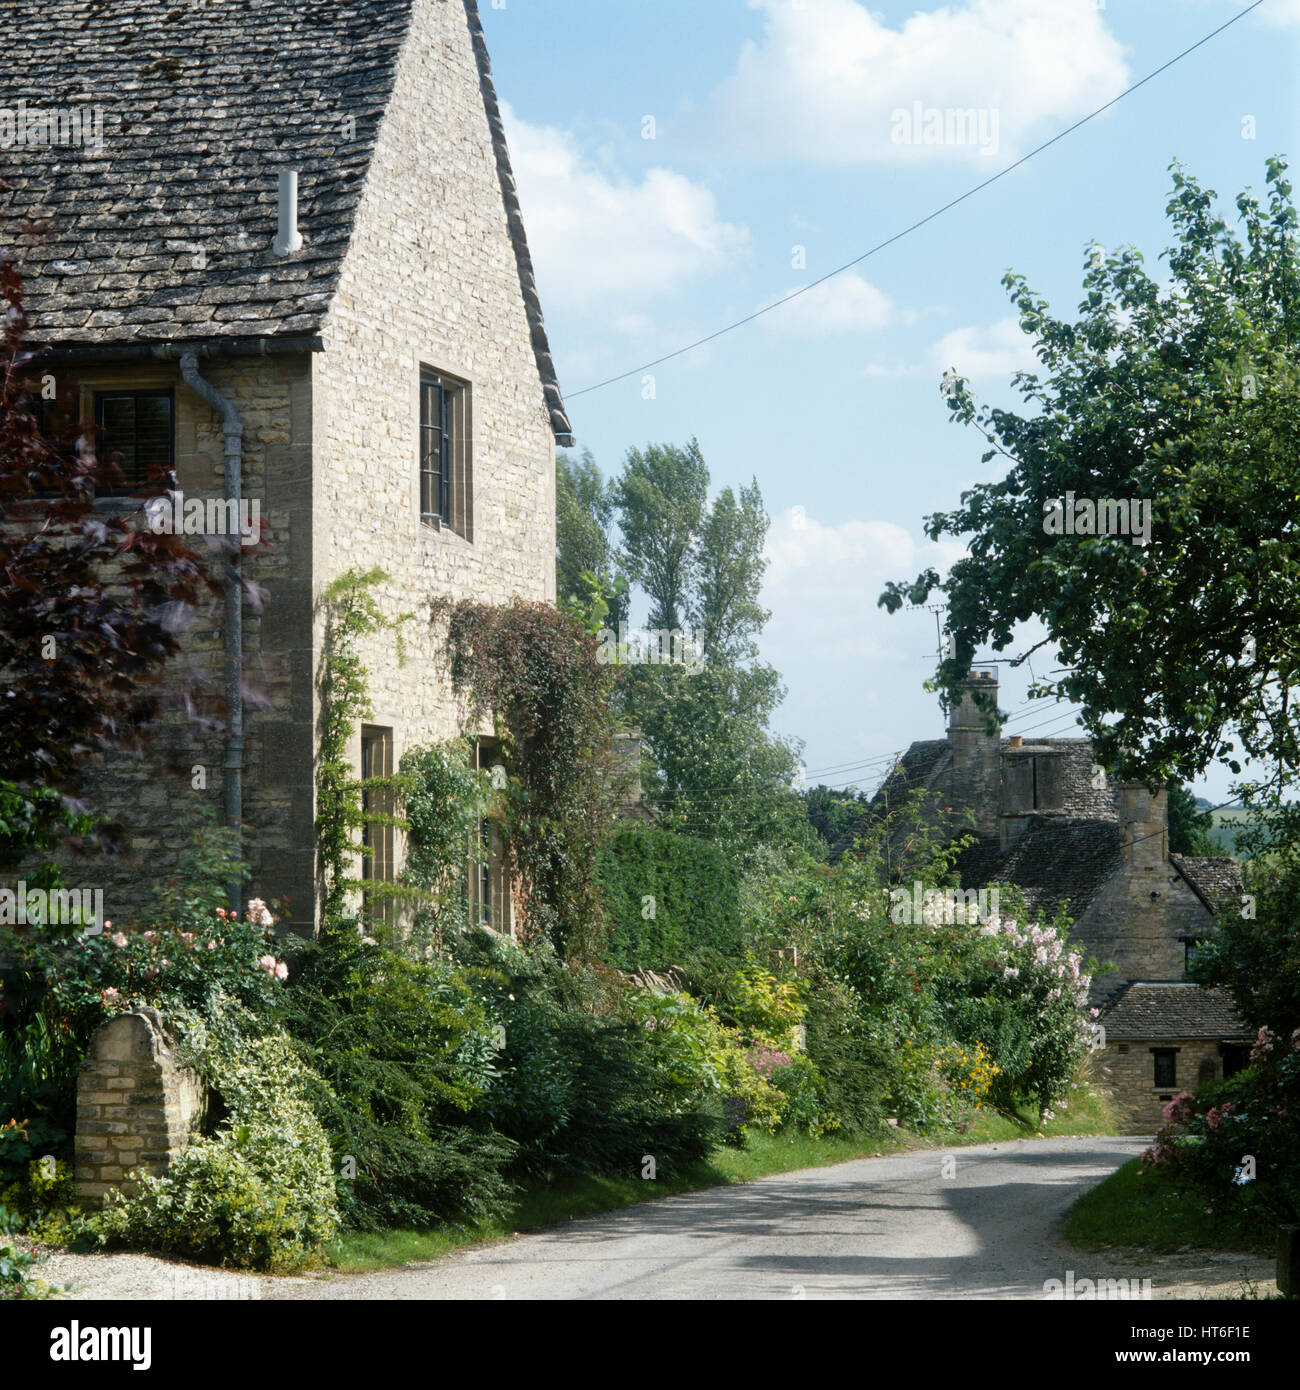 Stone house by a road. Stock Photo